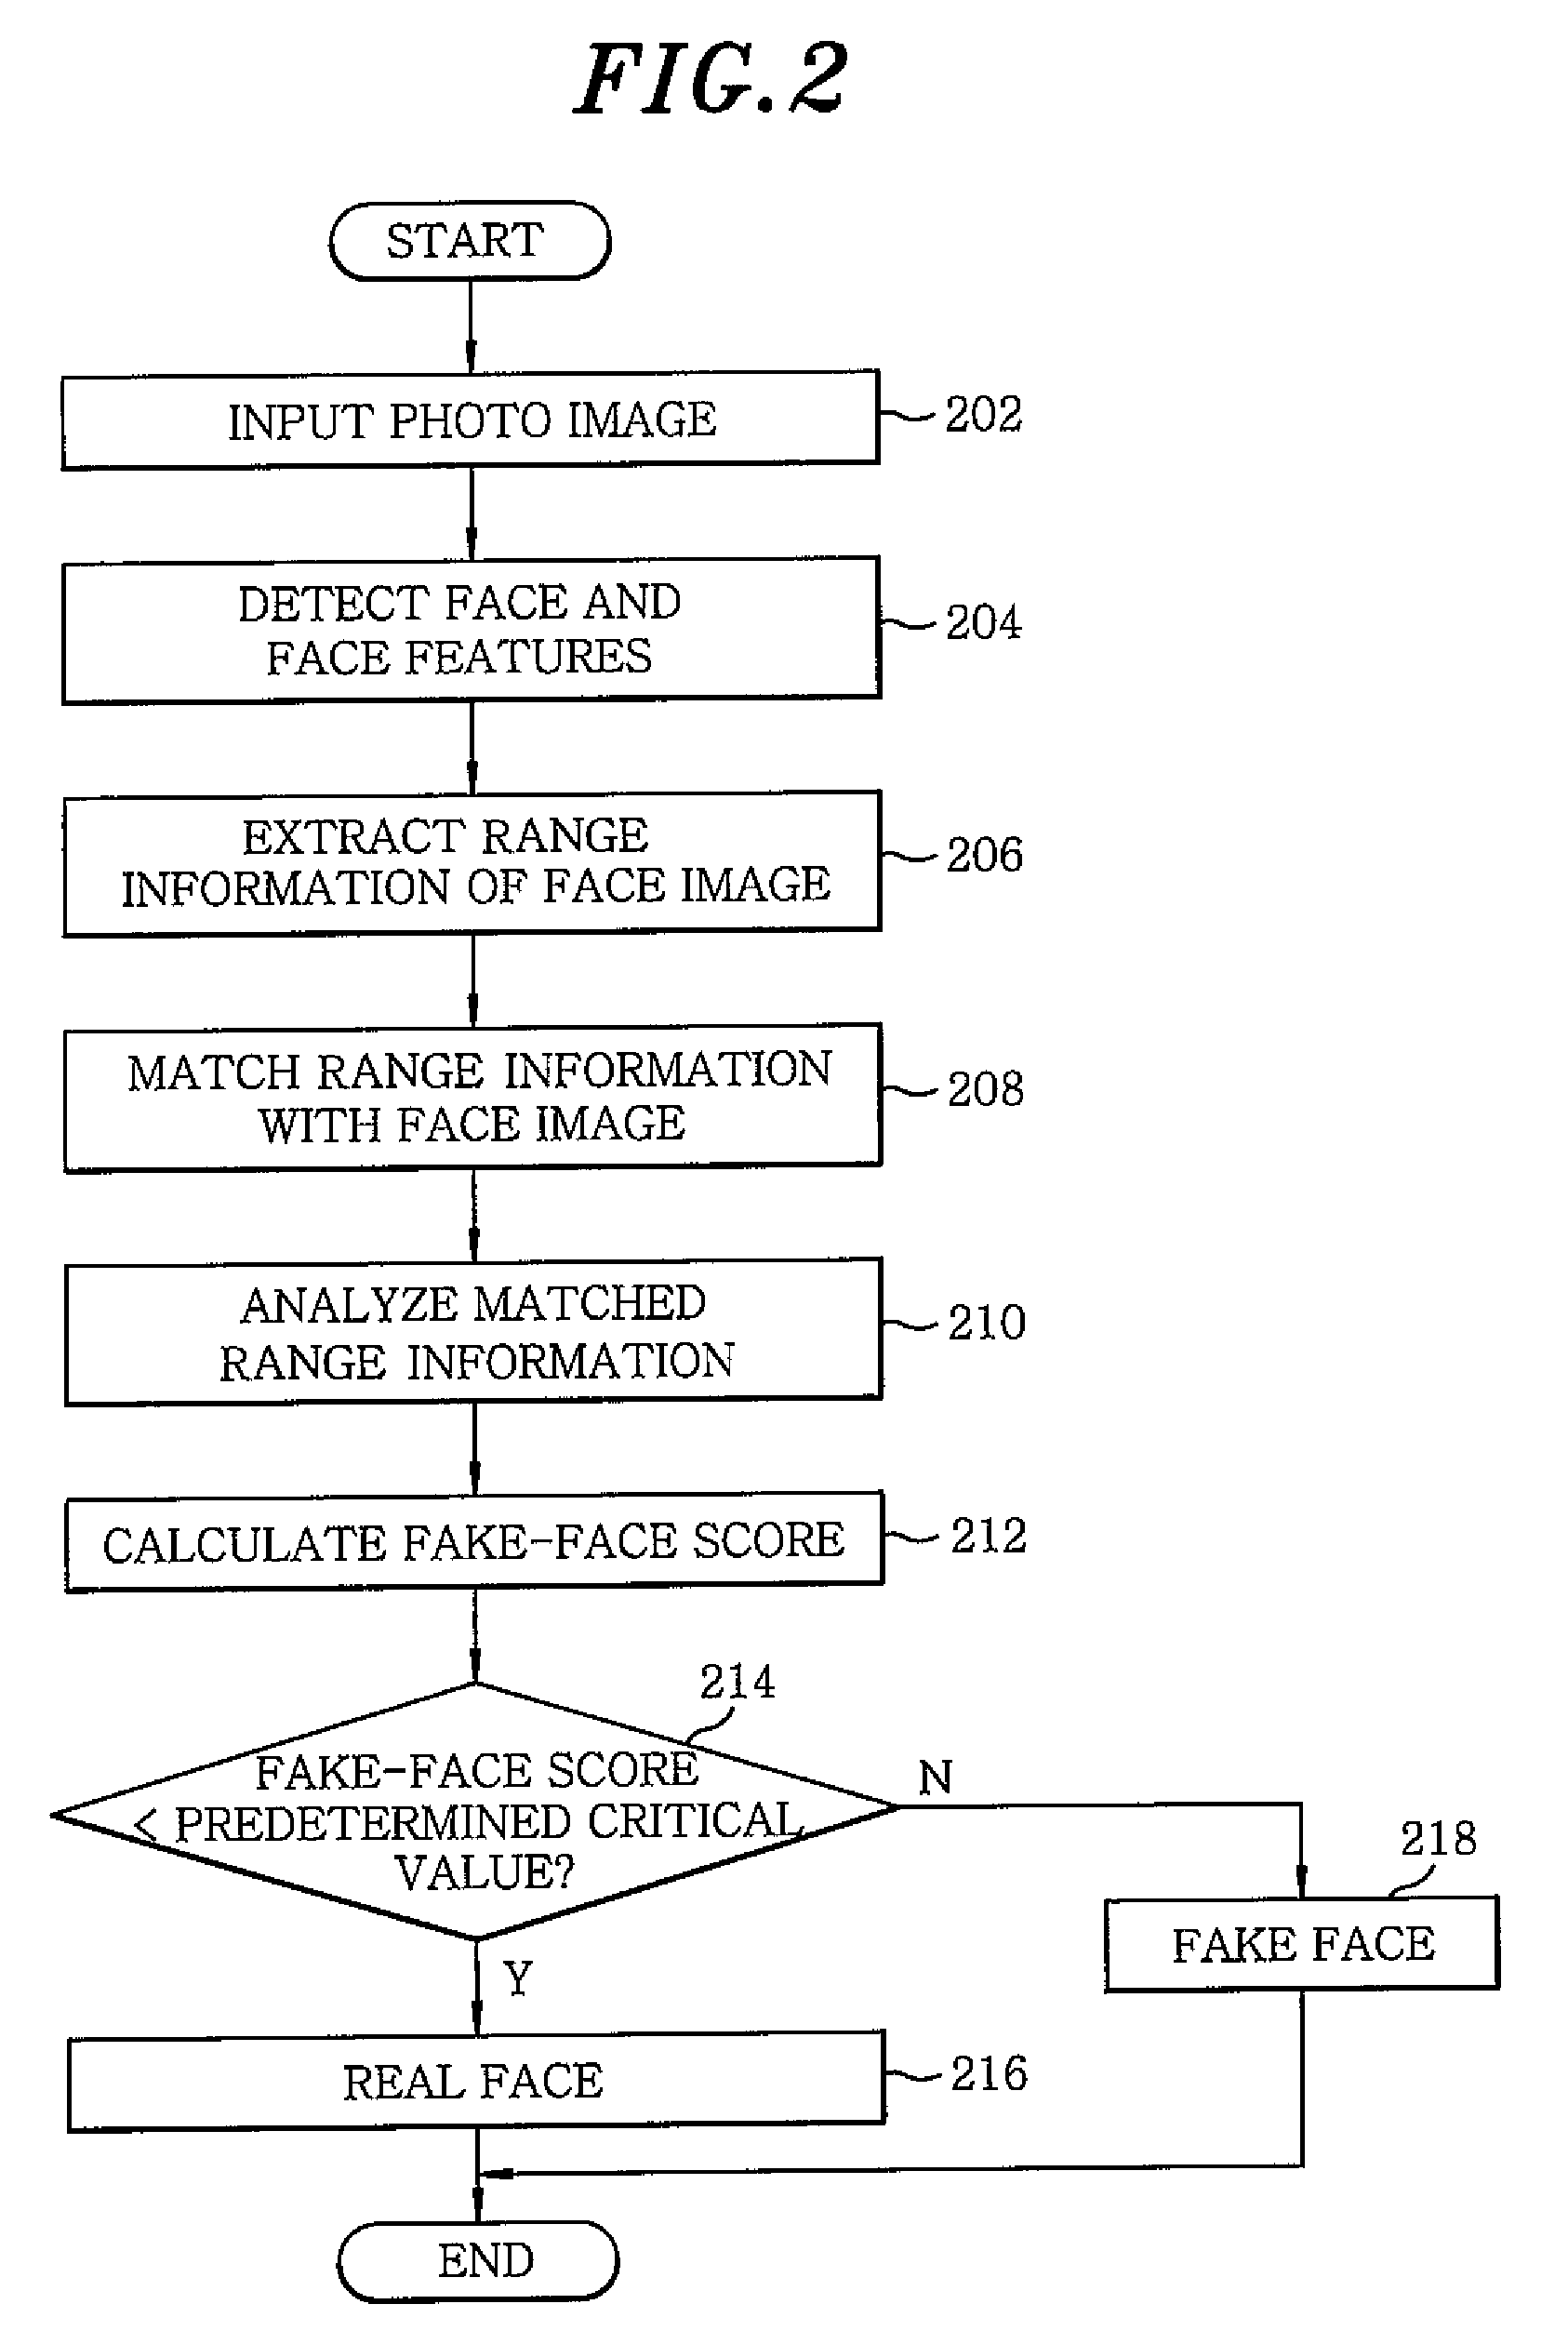 Method and apparatus for fake-face detection using range information